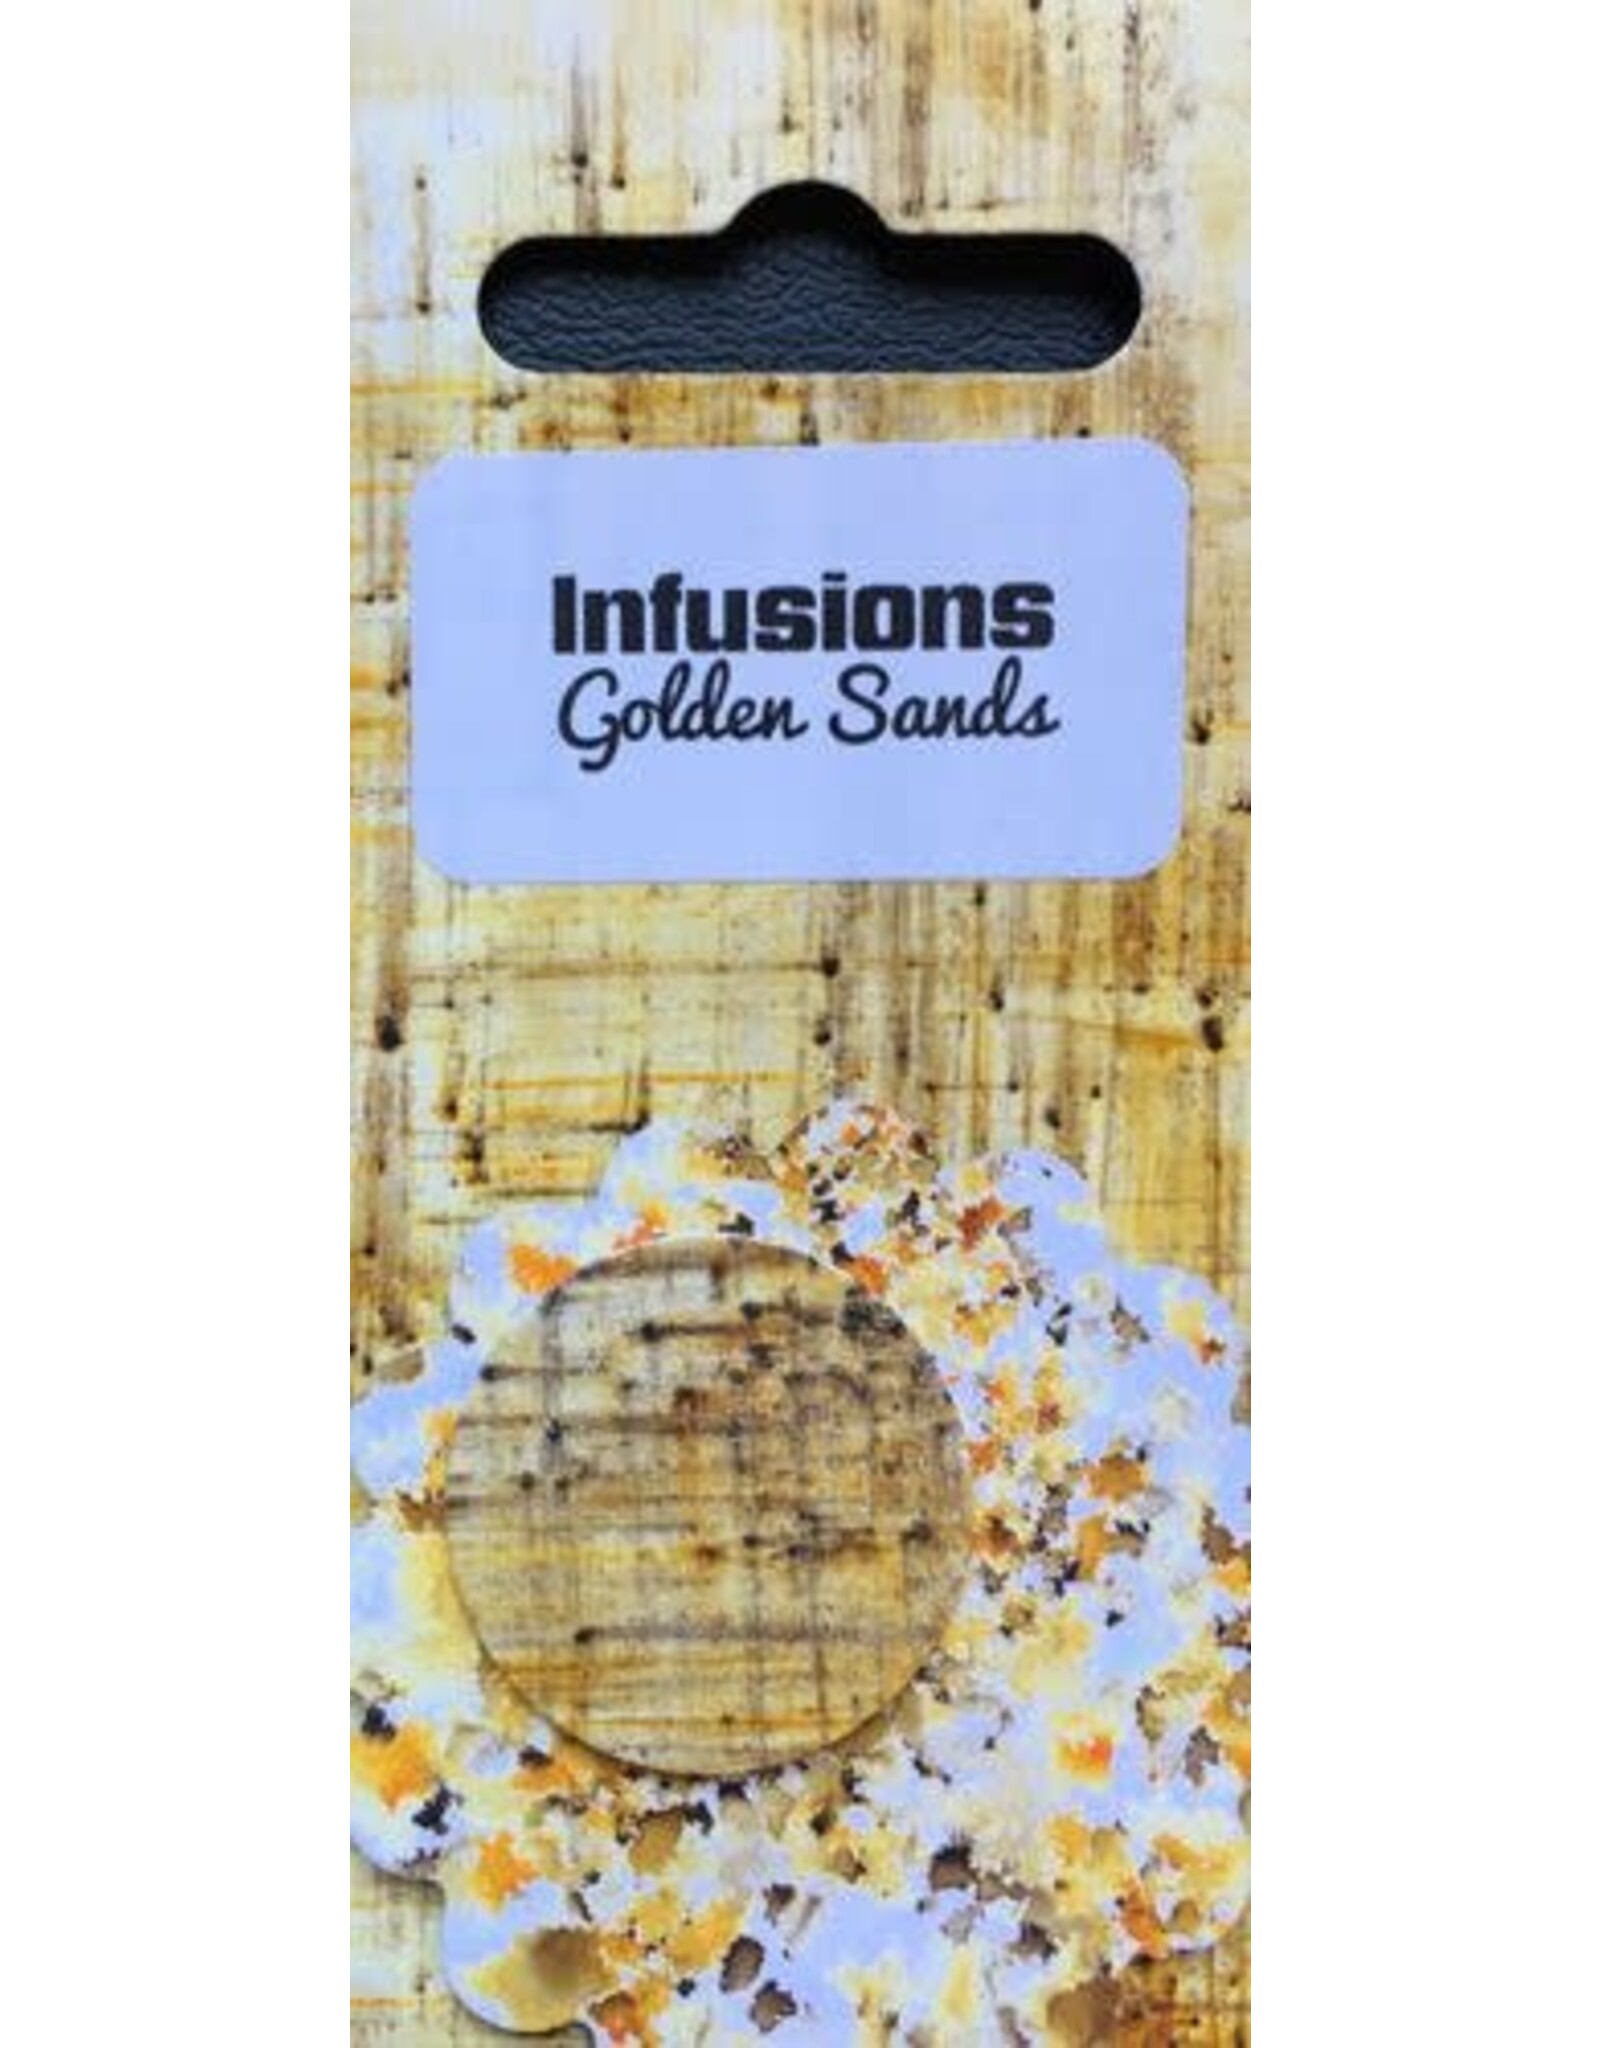 PAPER ARTSY PAPER ARTSY GOLDEN SANDS INFUSIONS 15ML